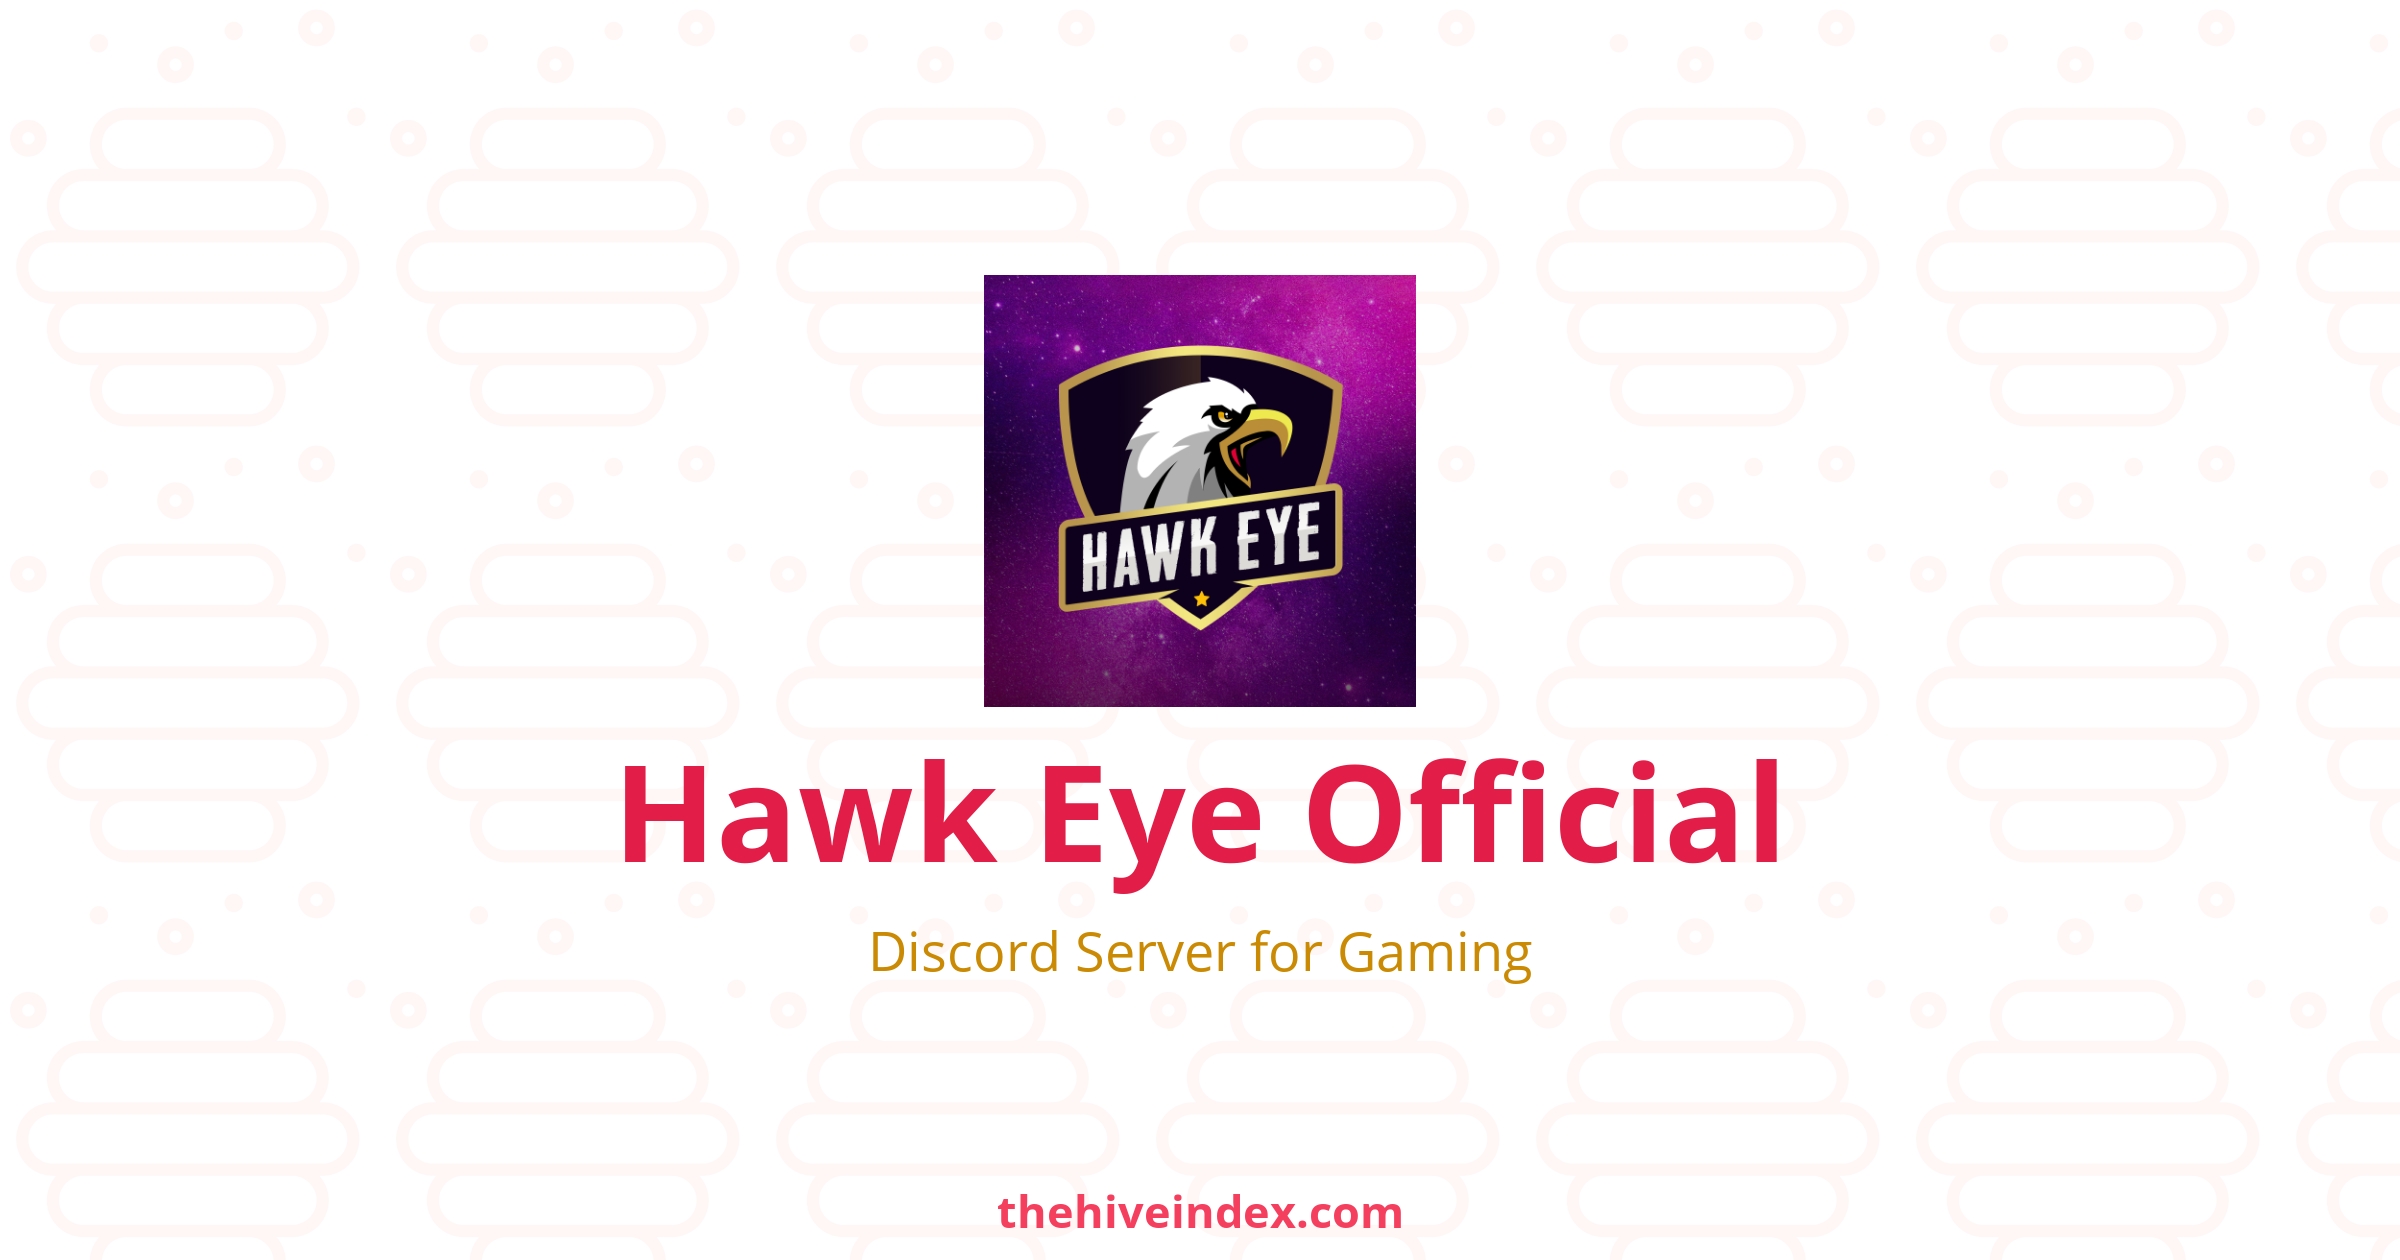 OFFICIAL FREE FIRE DISCORD SERVER